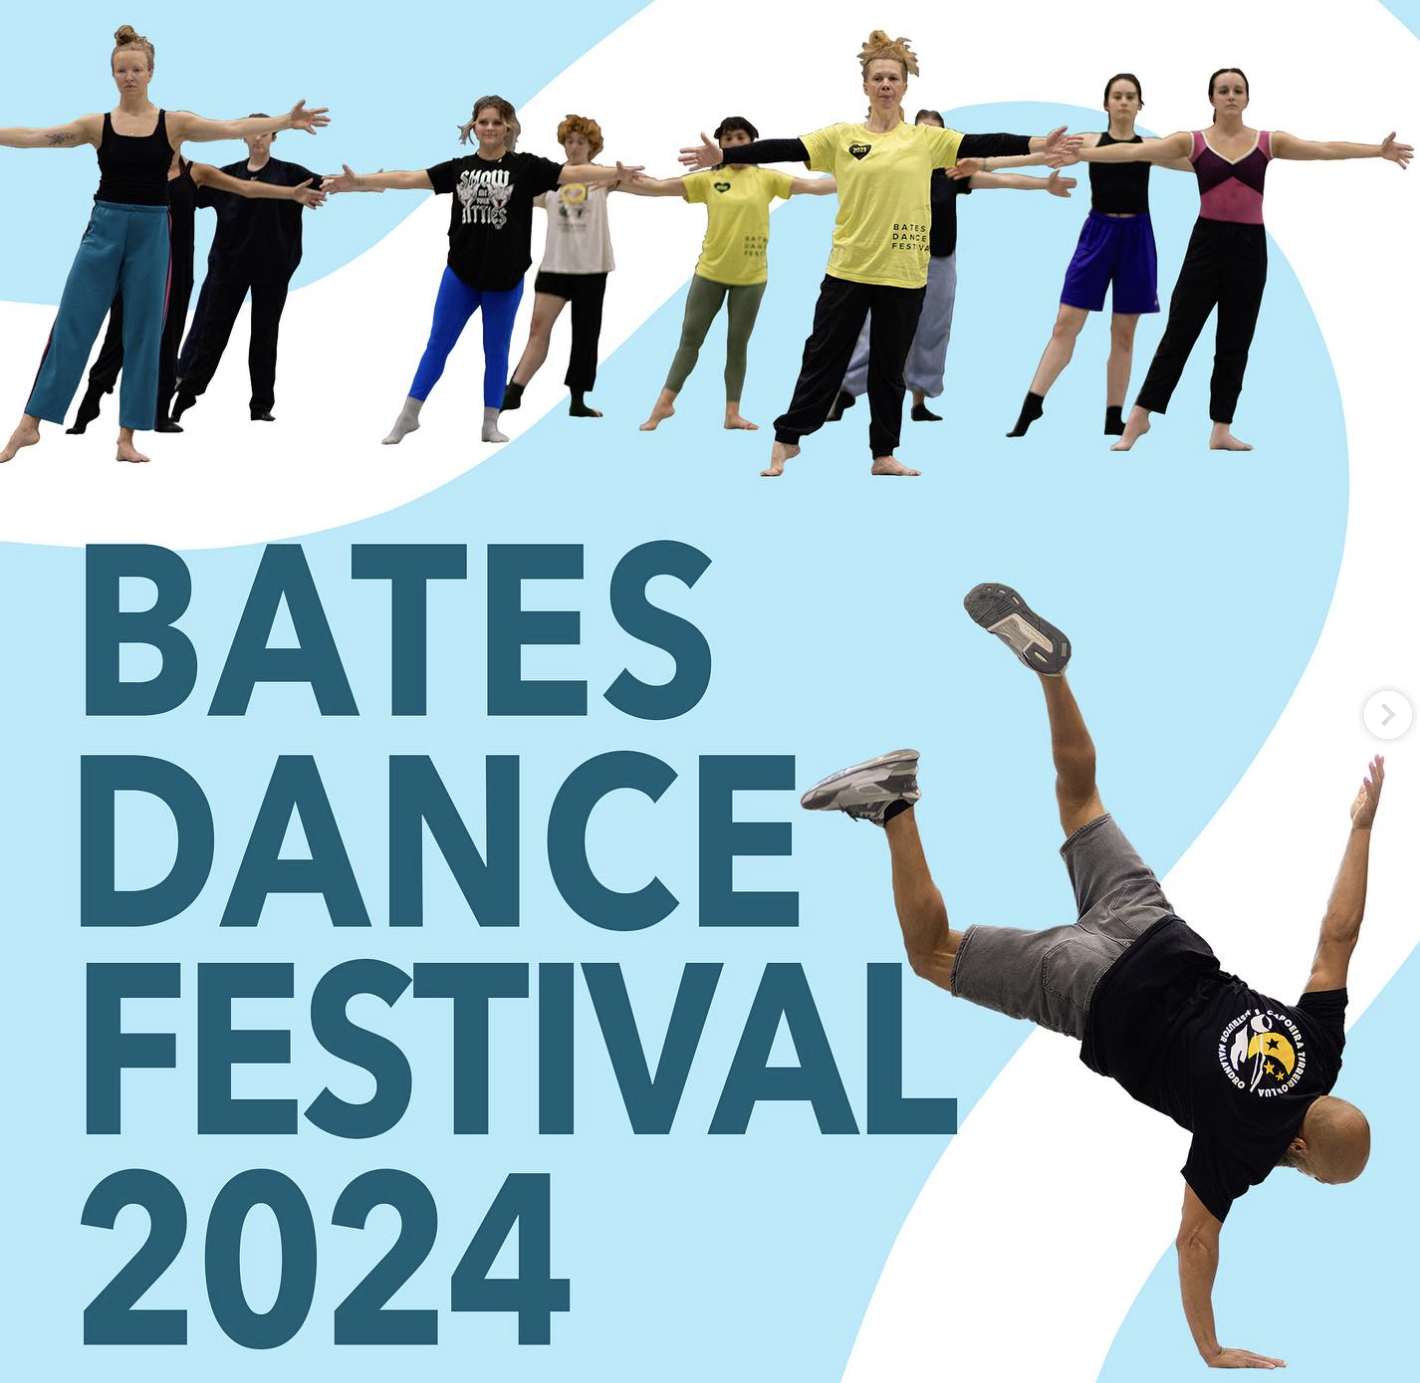 Bates Dance Festival poster with photo of dancers.